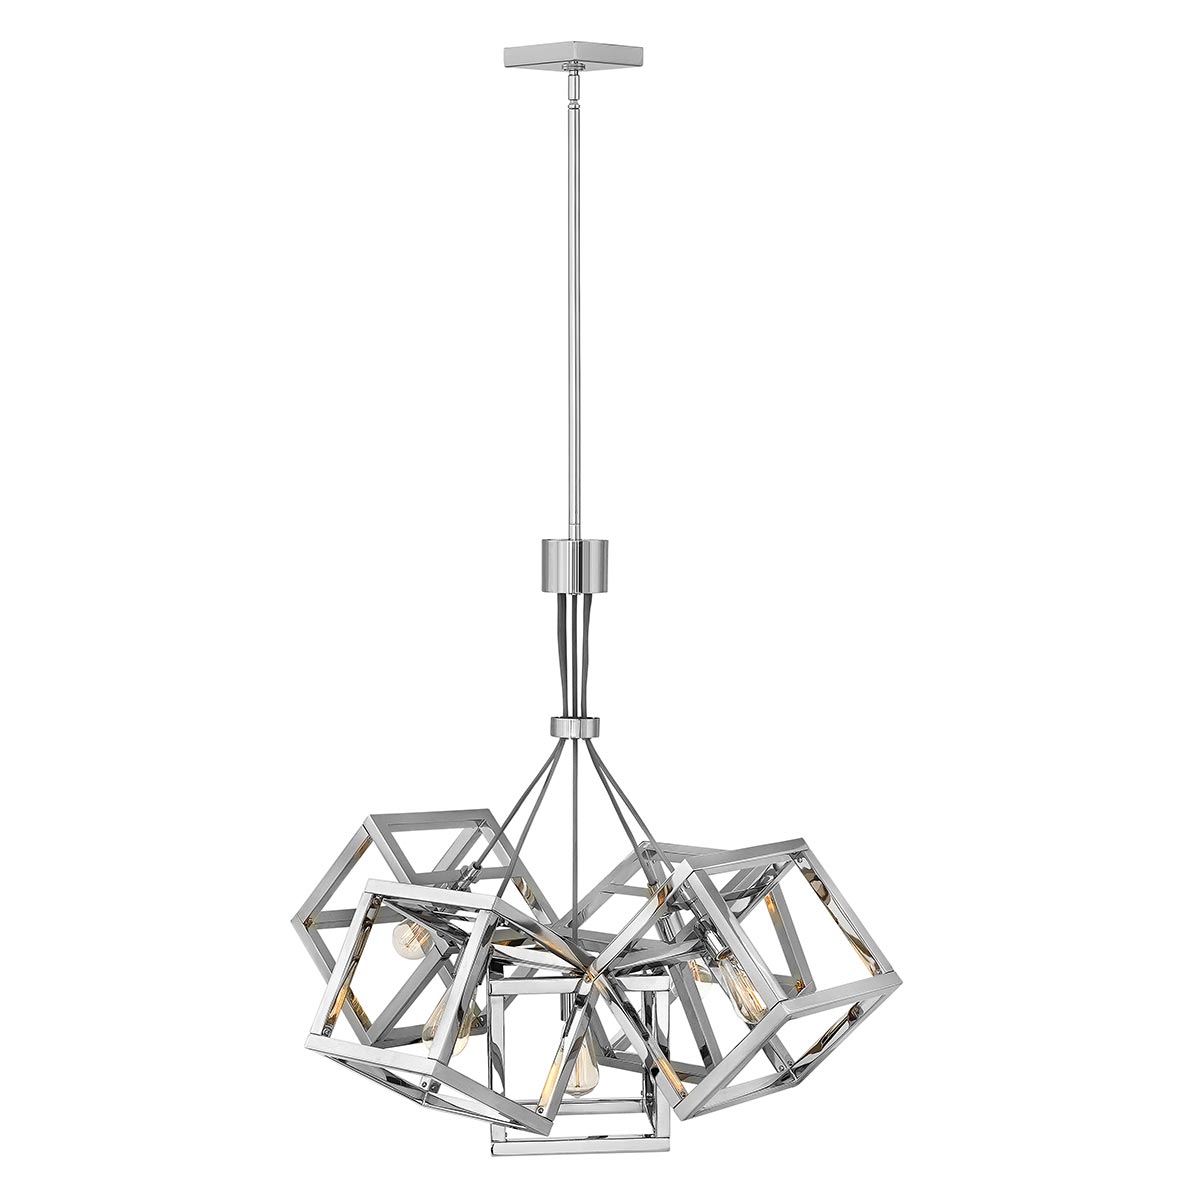 Ensemble Contemporary 5 Light Cluster Ceiling Pendant Polished Nickel